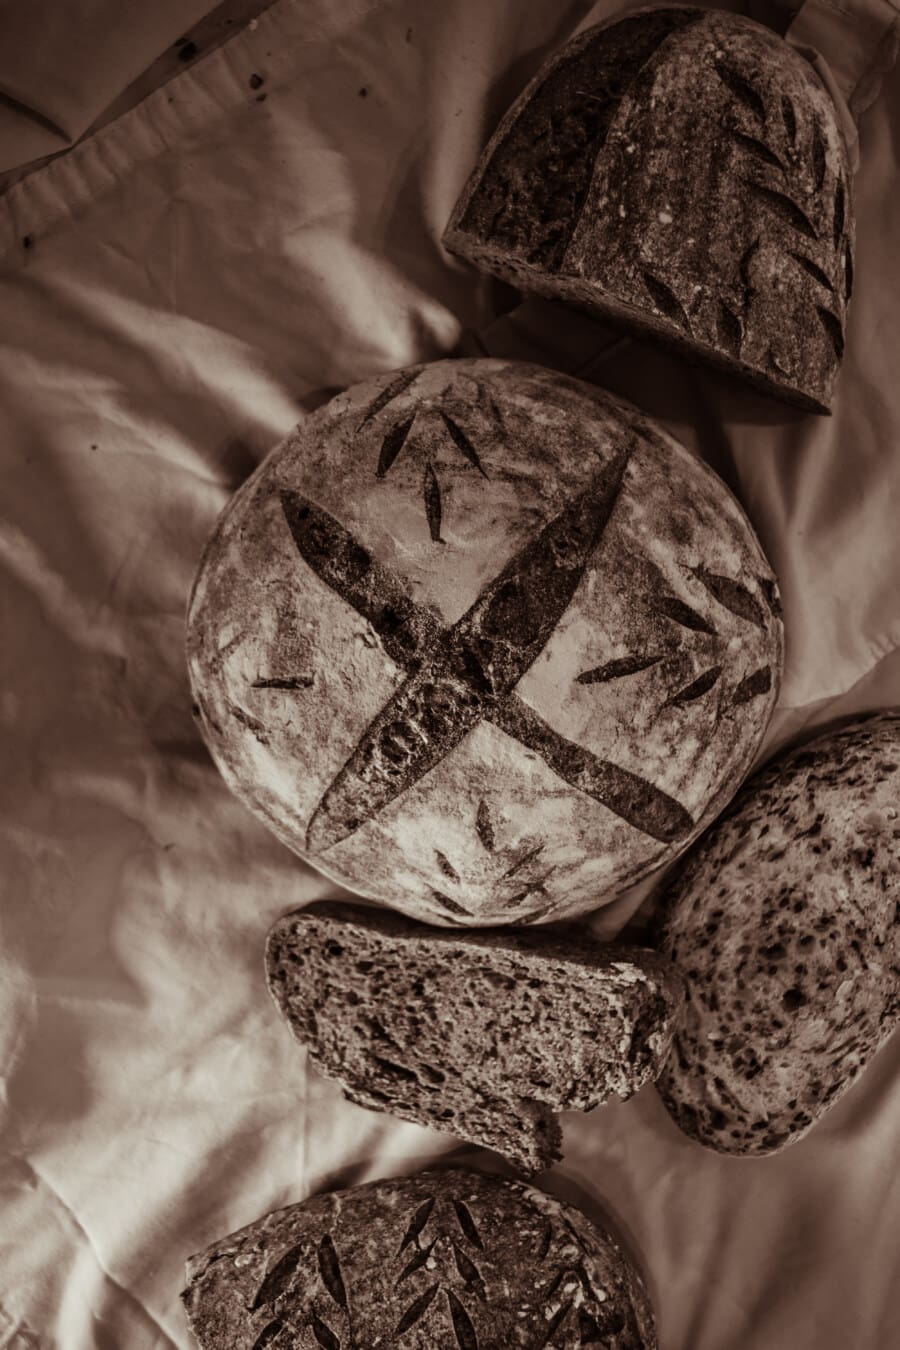 wholemeal flour, bread, traditional, sepia, monochrome, baked goods, tradition, homemade, art, dark